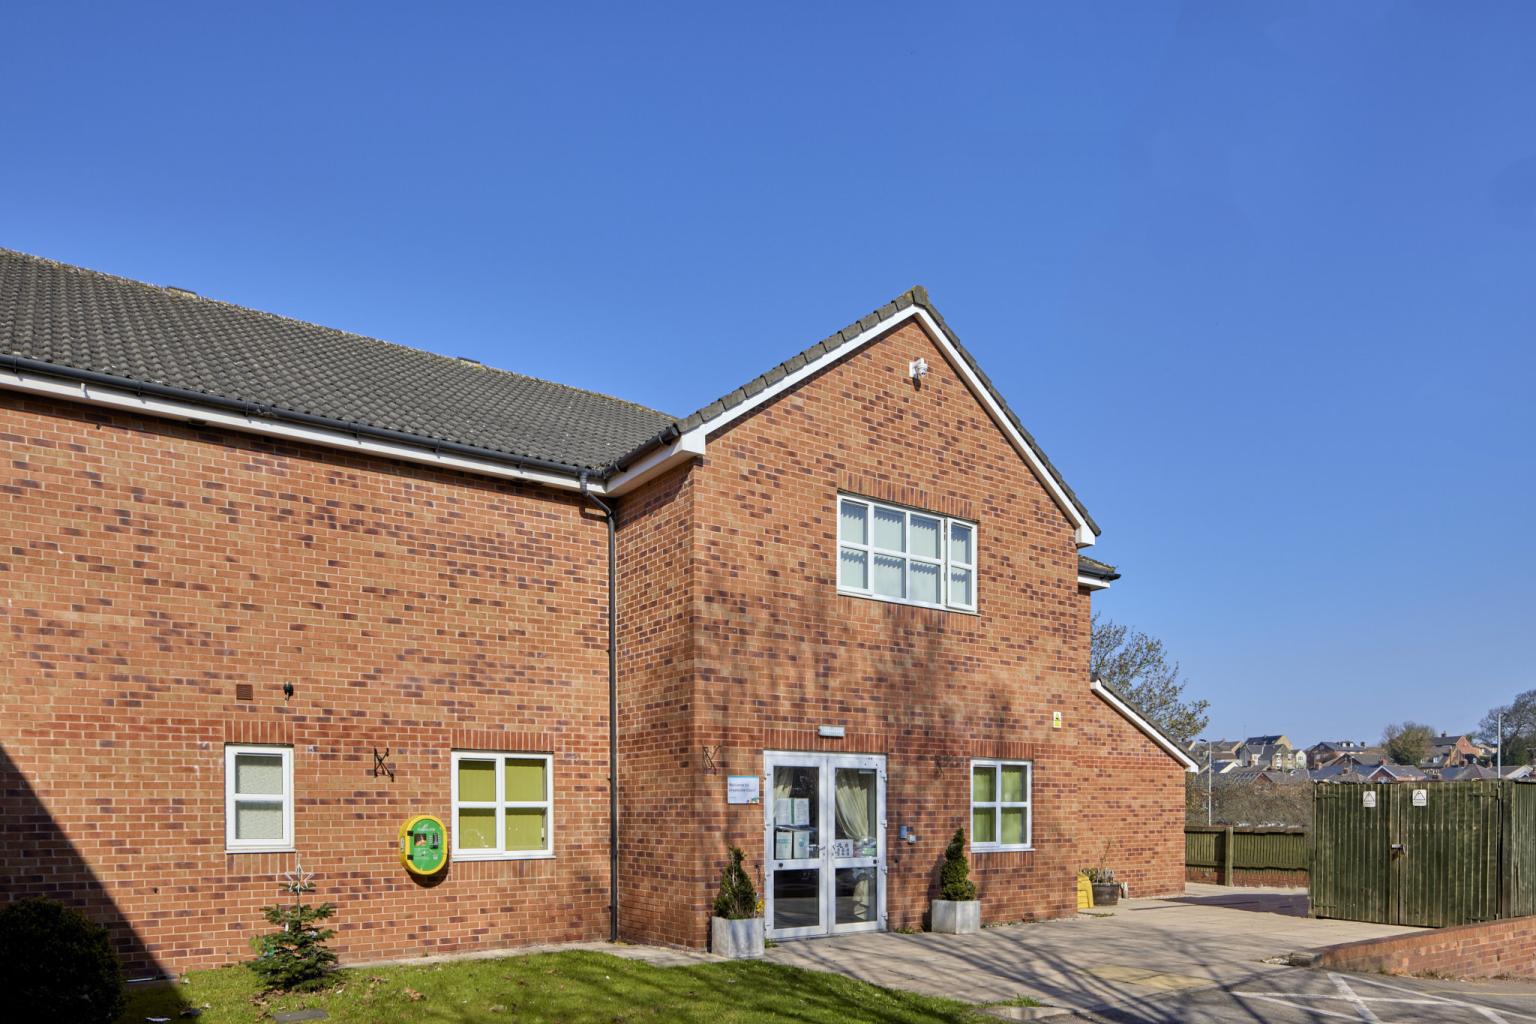 Greenside Court care home